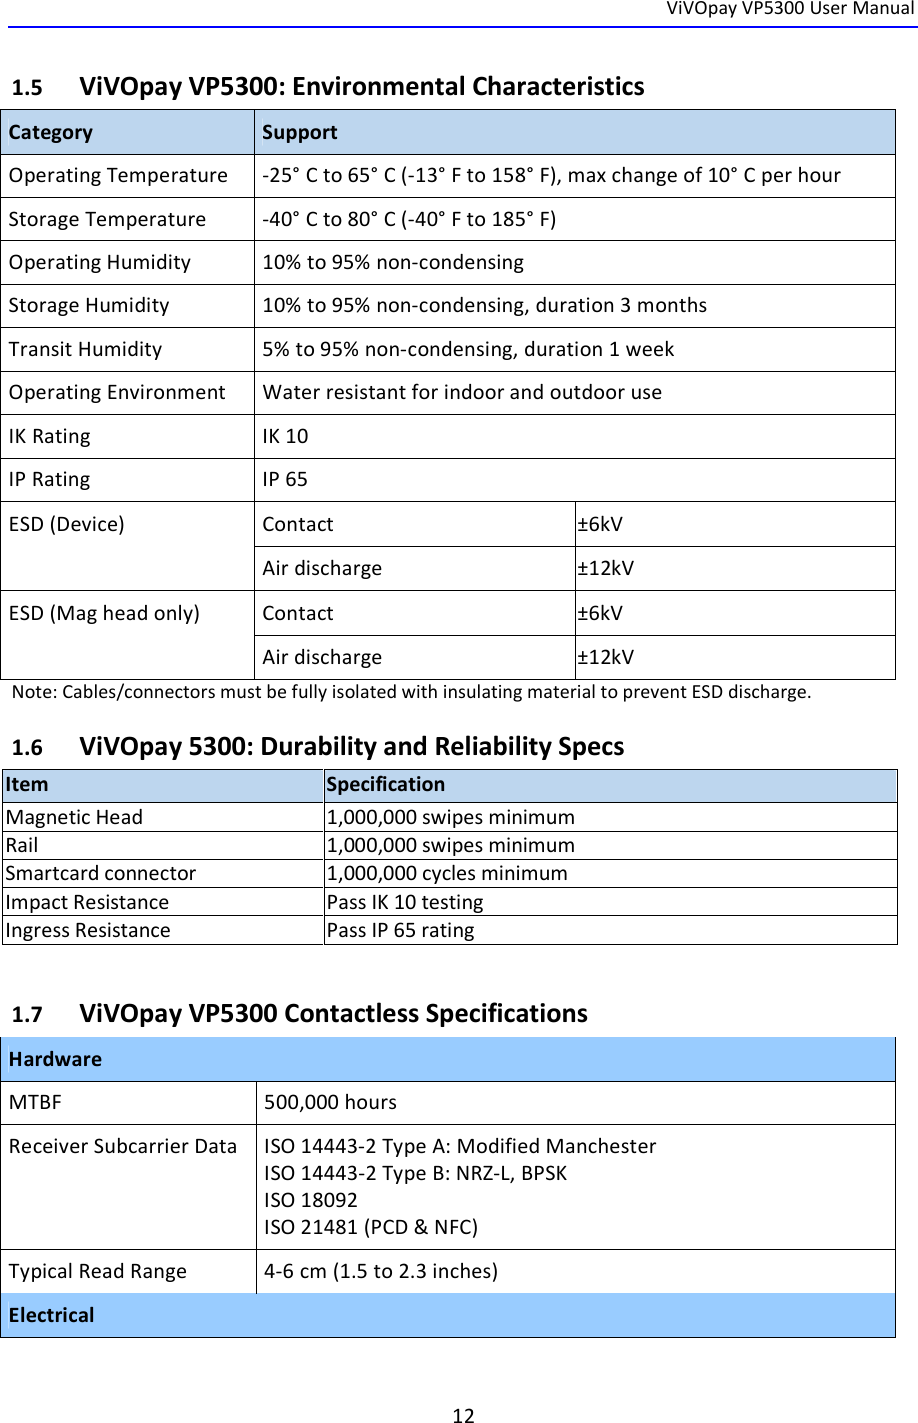  ViVOpay VP5300 User Manual   12  1.5 ViVOpay VP5300: Environmental Characteristics Category Support Operating Temperature -25° C to 65° C (-13° F to 158° F), max change of 10° C per hour Storage Temperature -40° C to 80° C (-40° F to 185° F) Operating Humidity 10% to 95% non-condensing Storage Humidity 10% to 95% non-condensing, duration 3 months Transit Humidity 5% to 95% non-condensing, duration 1 week Operating Environment Water resistant for indoor and outdoor use IK Rating IK 10 IP Rating IP 65 ESD (Device) Contact ±6kV Air discharge ±12kV ESD (Mag head only) Contact ±6kV Air discharge ±12kV Note: Cables/connectors must be fully isolated with insulating material to prevent ESD discharge. 1.6 ViVOpay 5300: Durability and Reliability Specs Item Specification Magnetic Head 1,000,000 swipes minimum Rail 1,000,000 swipes minimum Smartcard connector 1,000,000 cycles minimum Impact Resistance Pass IK 10 testing  Ingress Resistance Pass IP 65 rating  1.7 ViVOpay VP5300 Contactless Specifications Hardware MTBF 500,000 hours  Receiver Subcarrier Data ISO 14443-2 Type A: Modified Manchester ISO 14443-2 Type B: NRZ-L, BPSK ISO 18092 ISO 21481 (PCD &amp; NFC) Typical Read Range 4-6 cm (1.5 to 2.3 inches) Electrical 